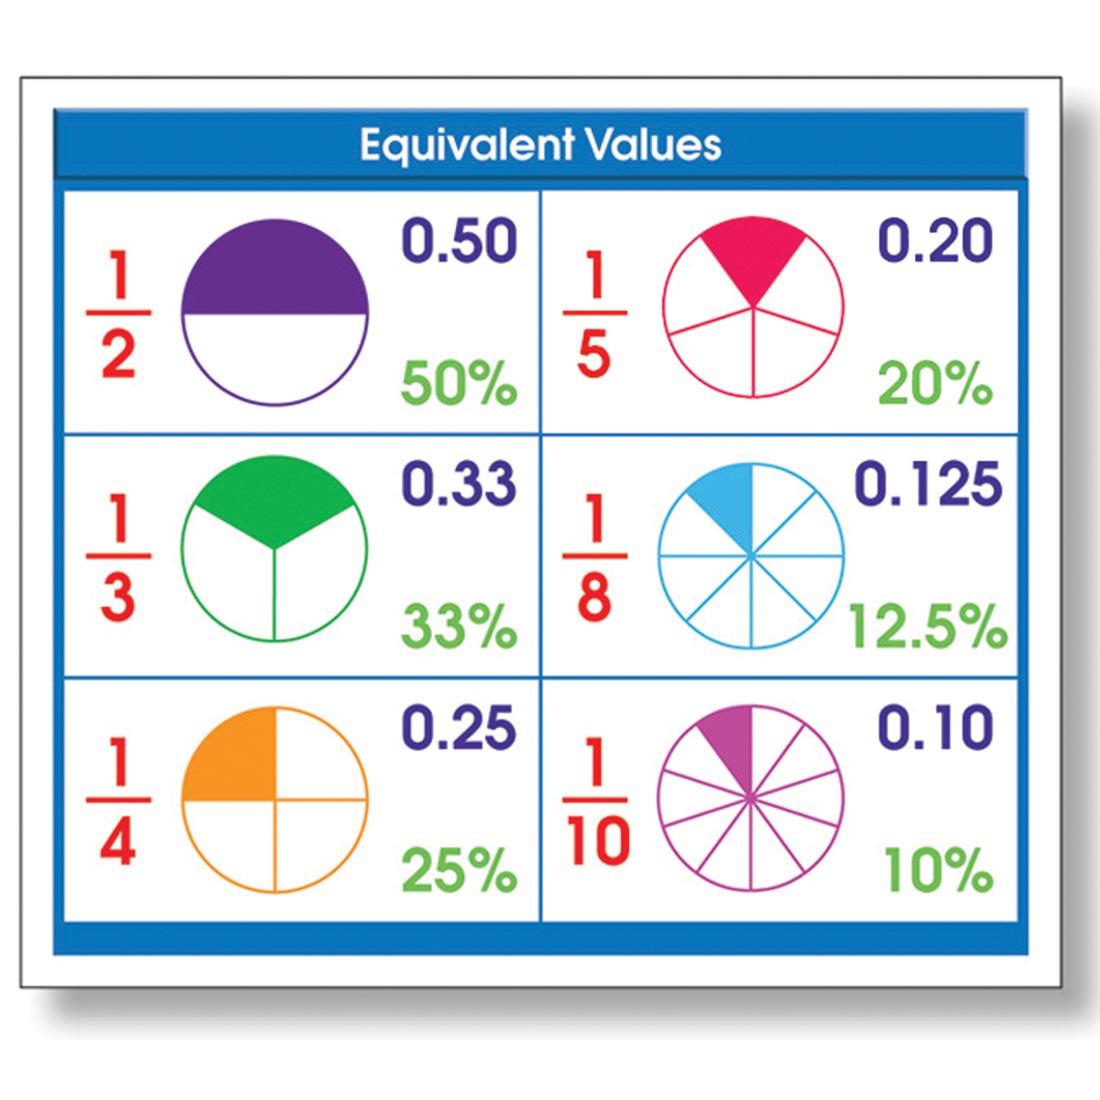 Adhesive Equivalent Values Desk reference